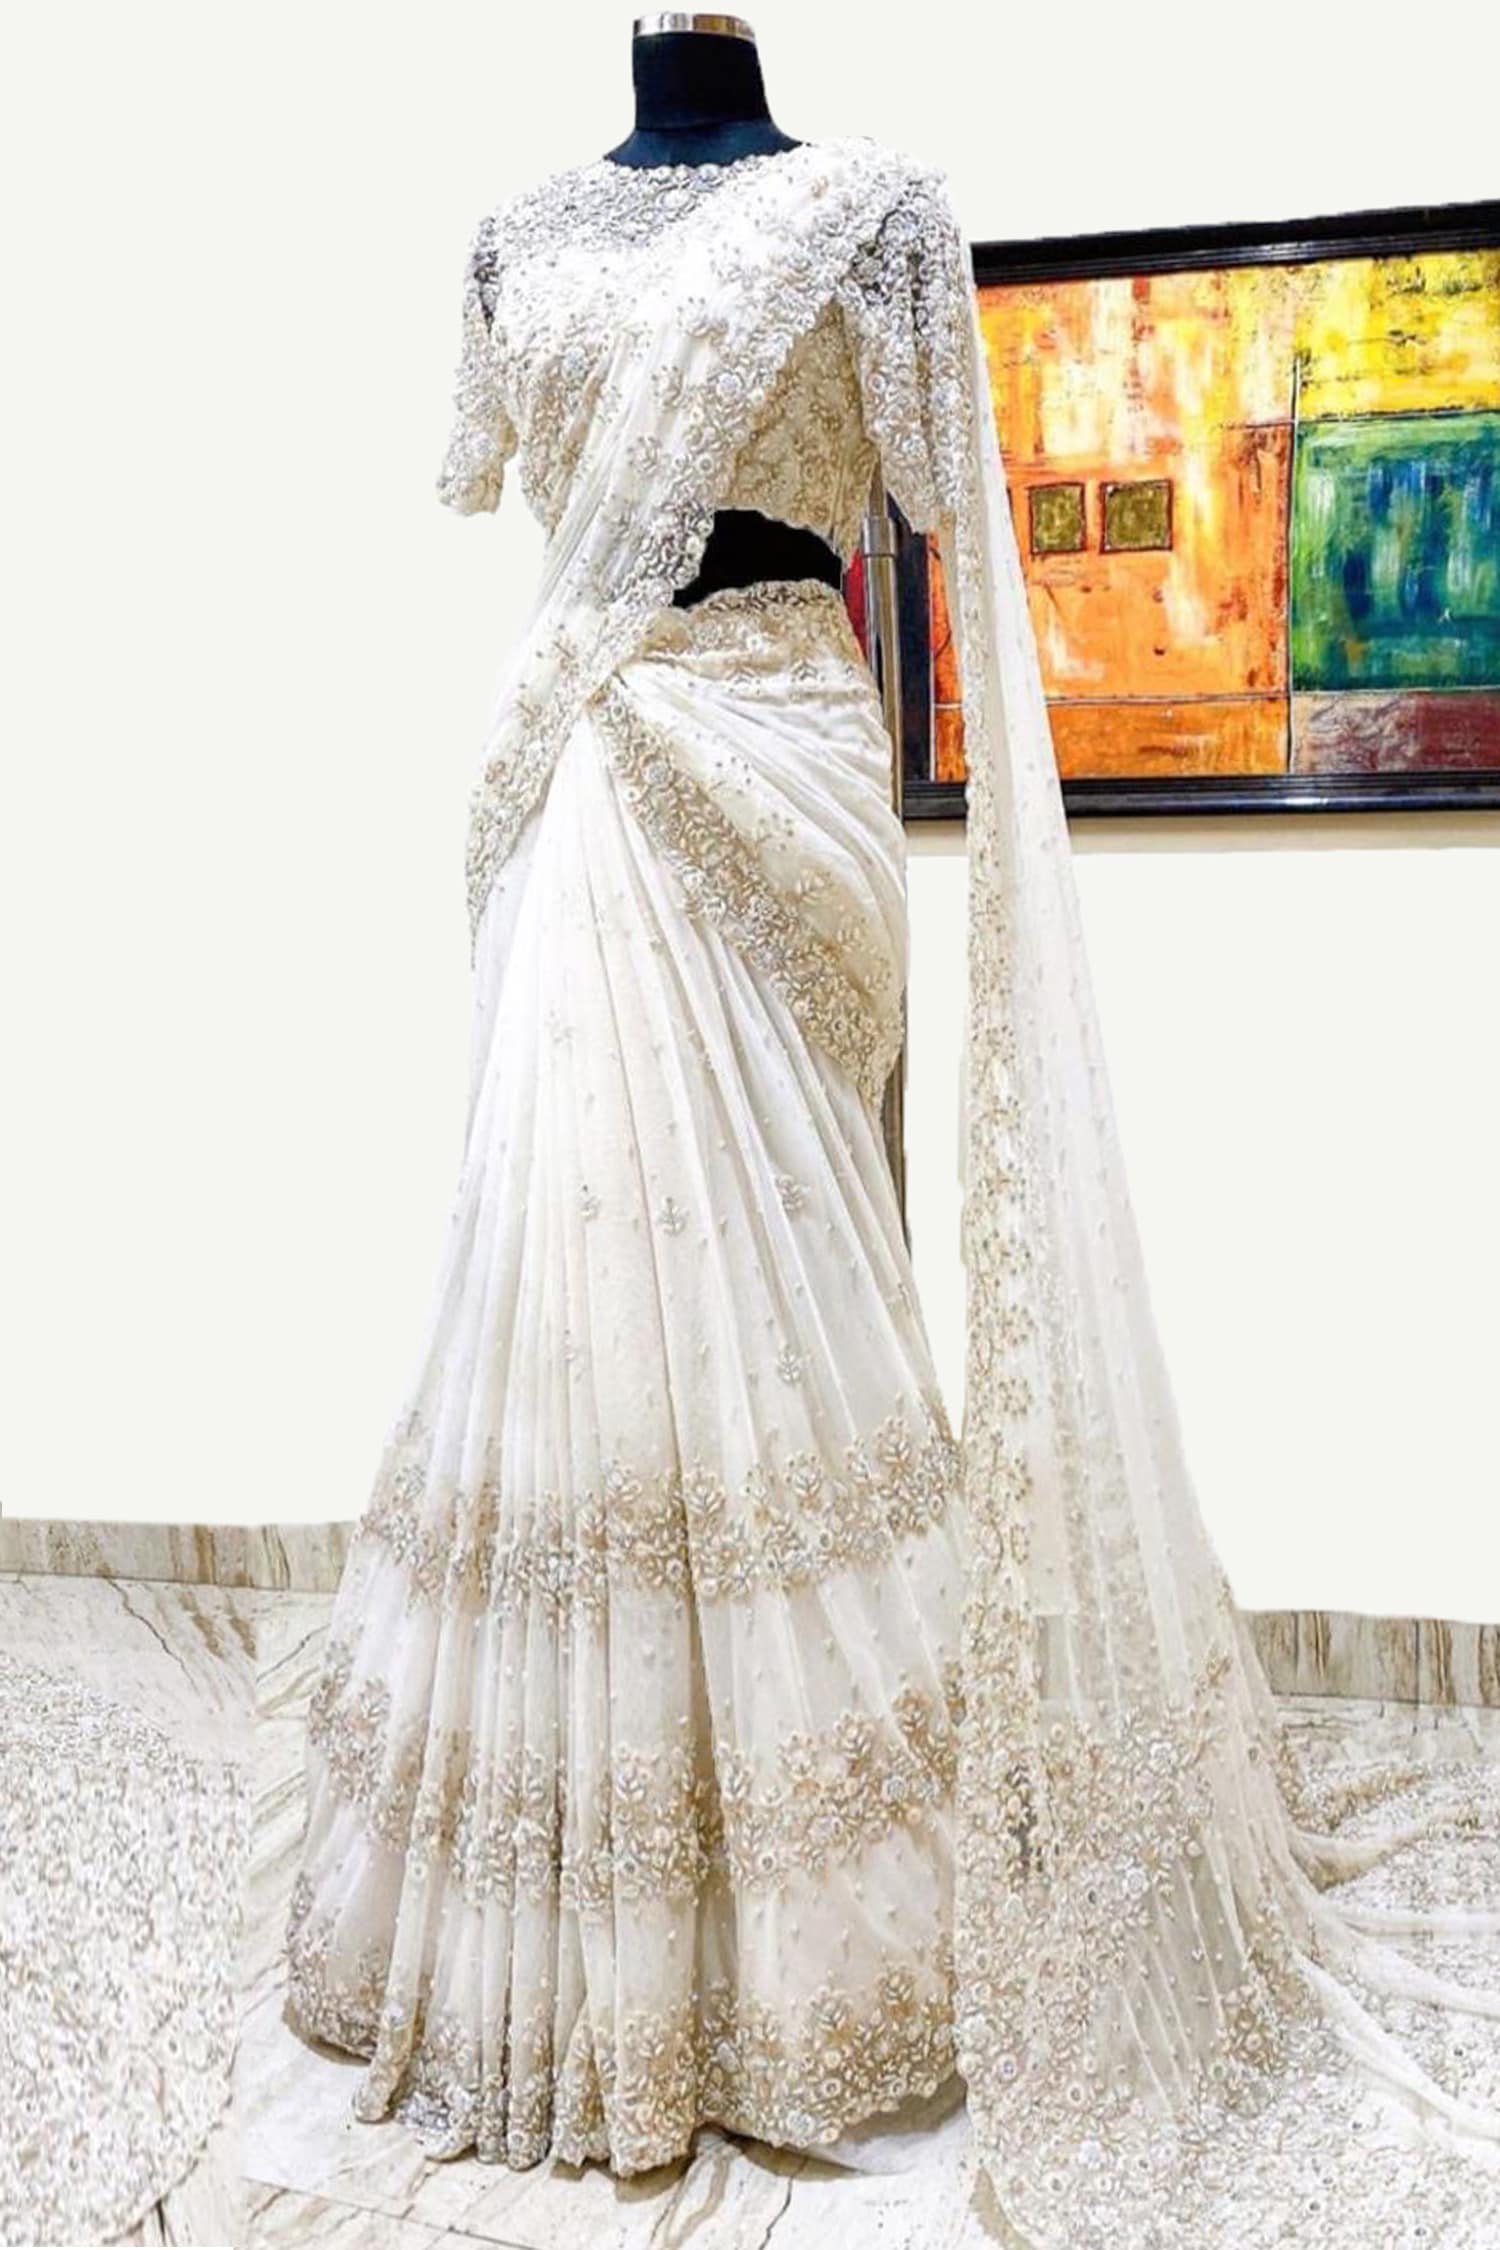 White and Red Embroidered Lehenga Choli for Women Designer Sabyasachi  Ethnic Wear South Indian Half Saree Bridal Wedding Dress Outfit Skirts -  Etsy